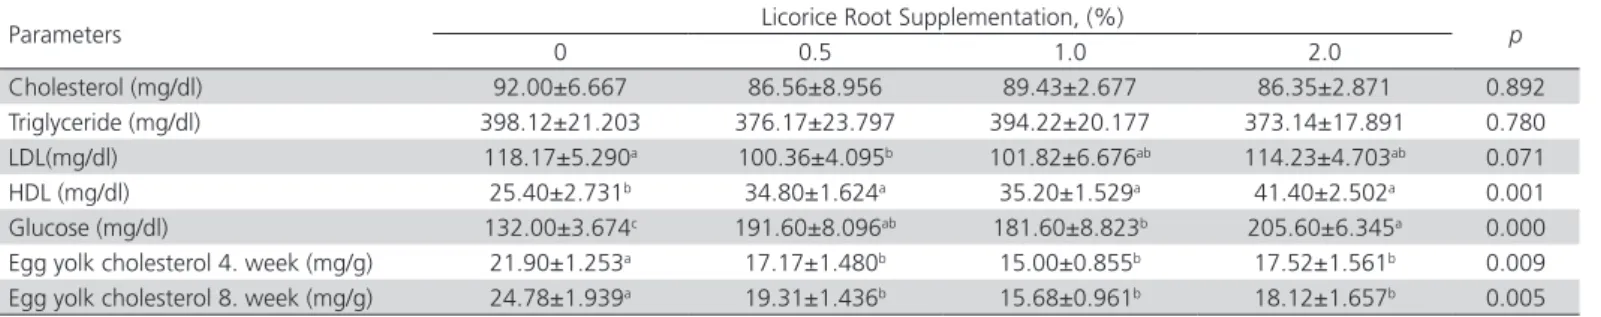 Table 3 – The effects of licorice root supplement on plasma biochemical parameters*